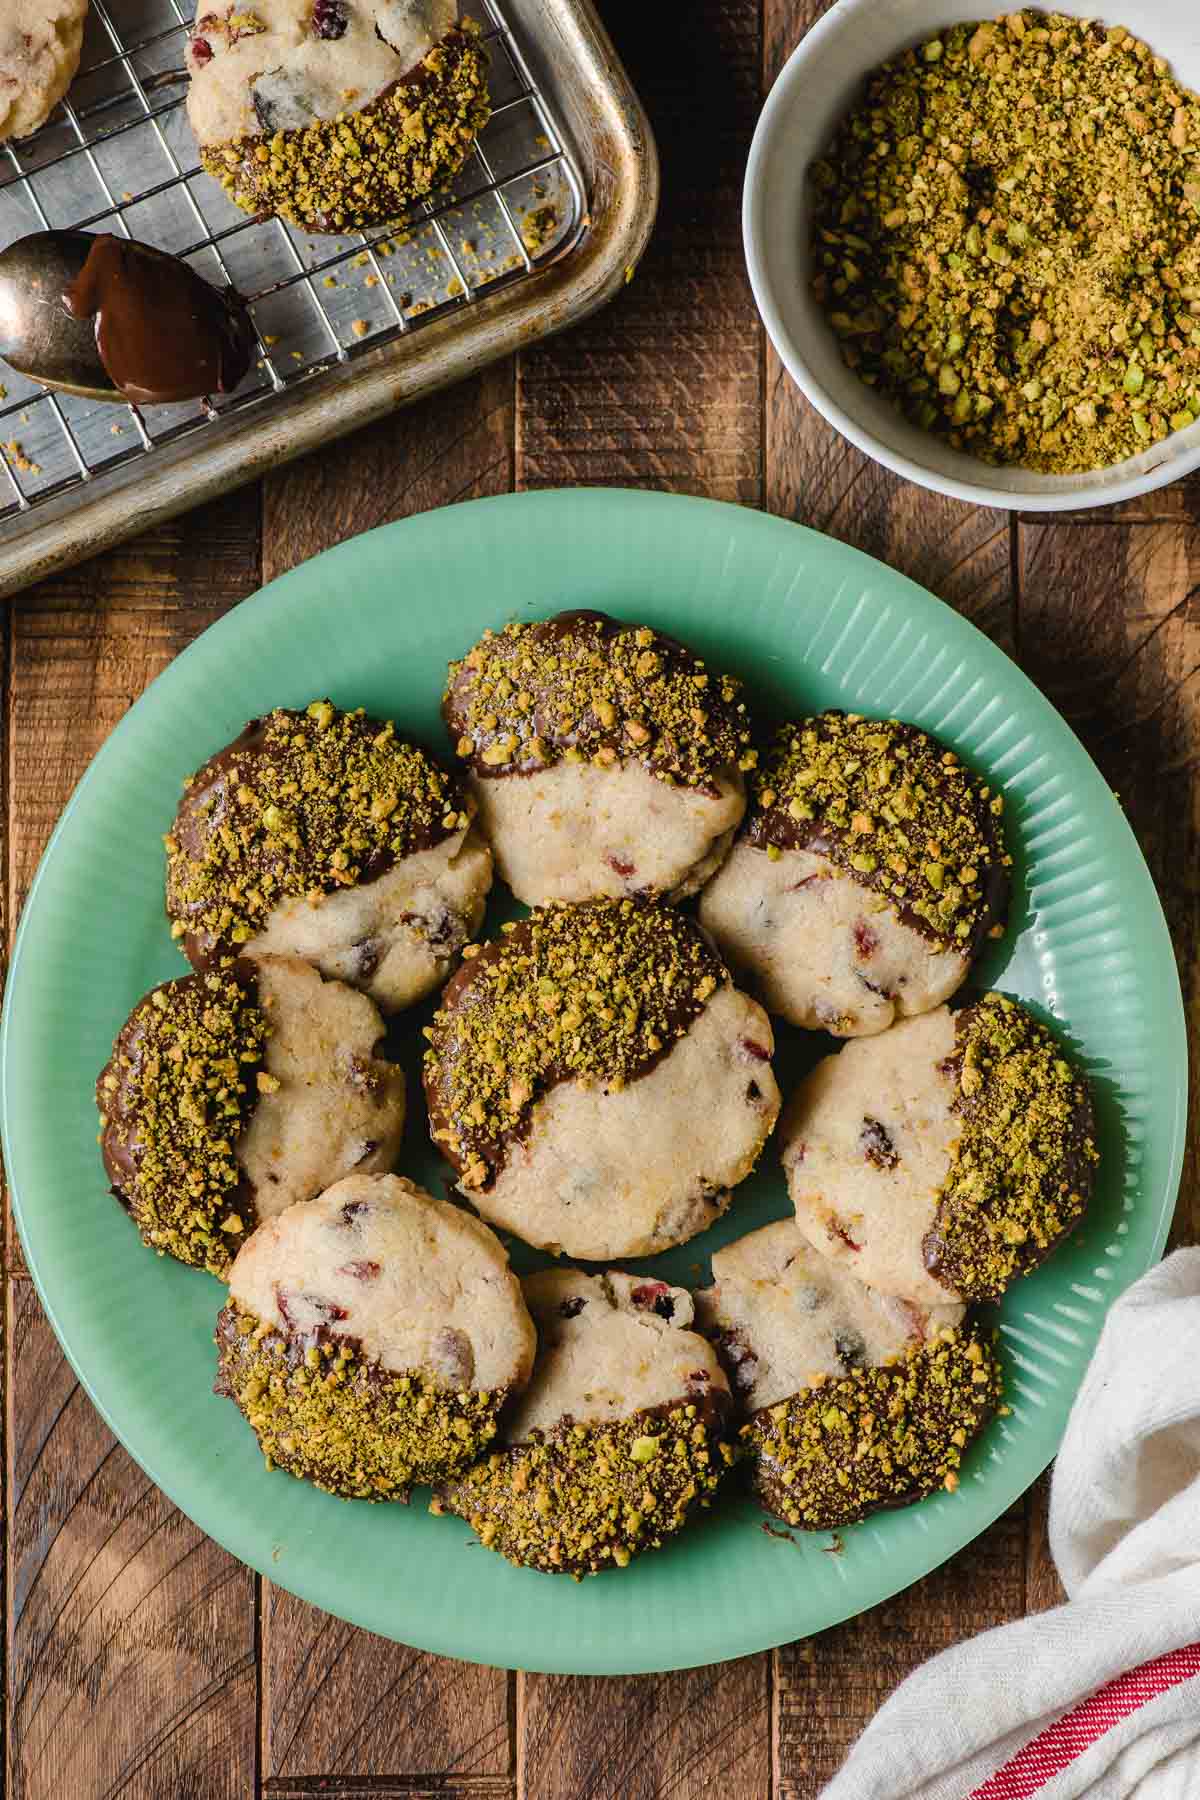 Chocolate dipped cranberry shortbread cookie sprinkled with pistachios and displayed on a green jadette plate.